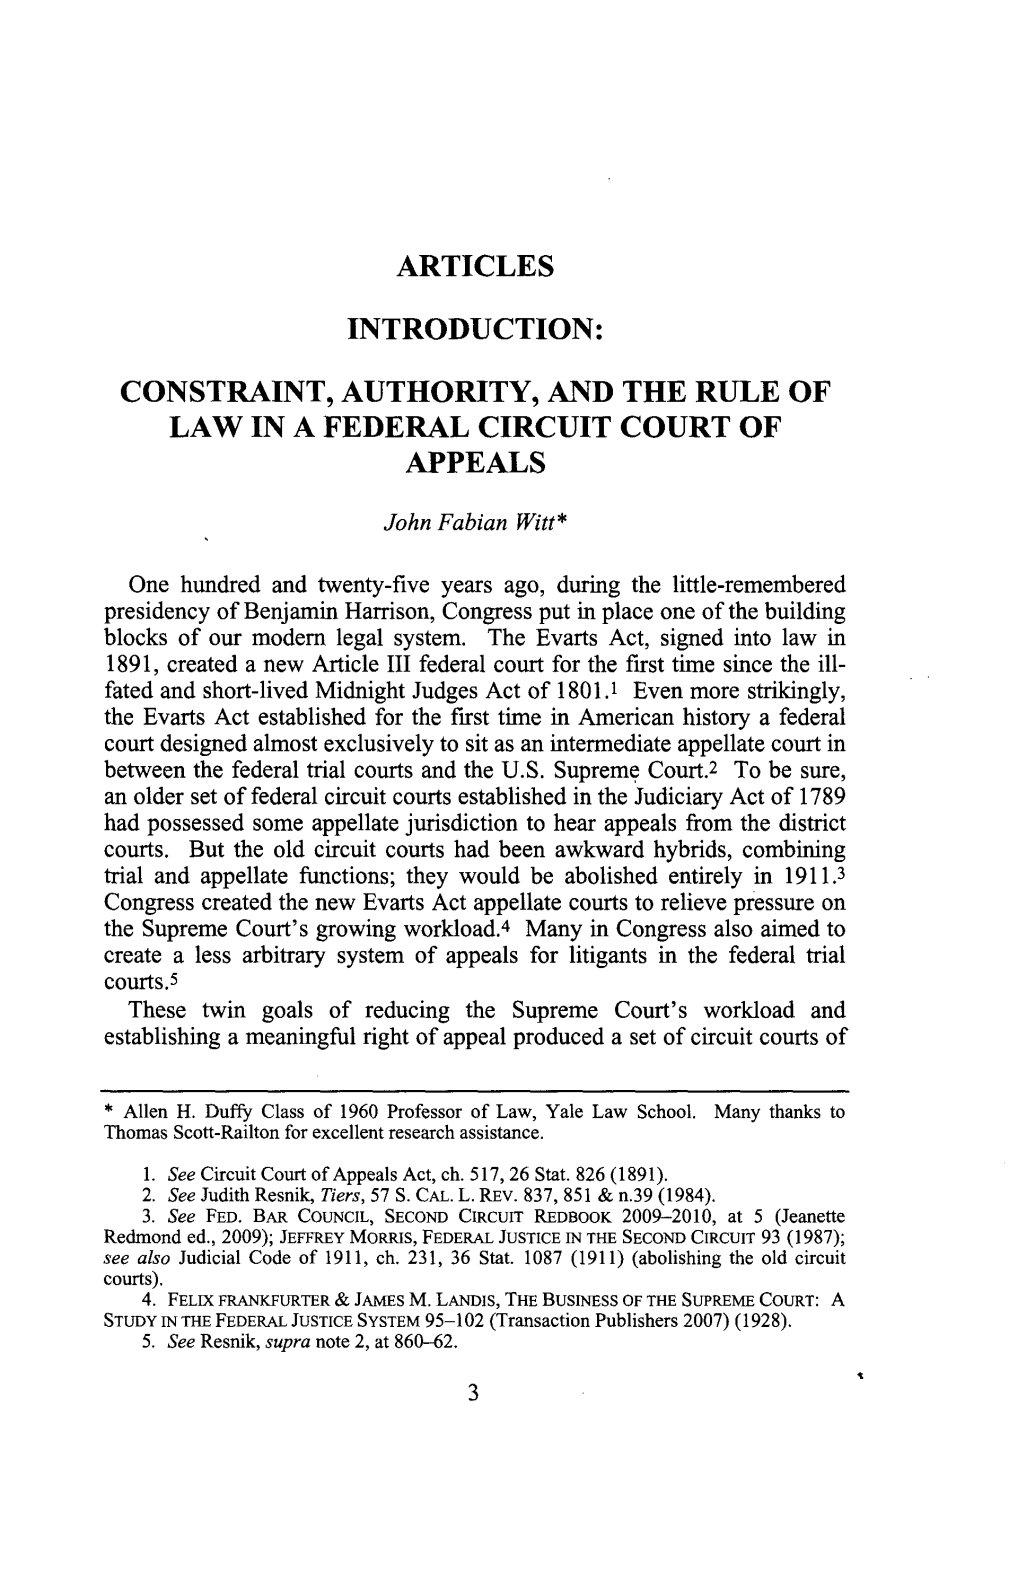 Constraint, Authority, and the Rule of Law in a Federal Circuit Court of Appeals